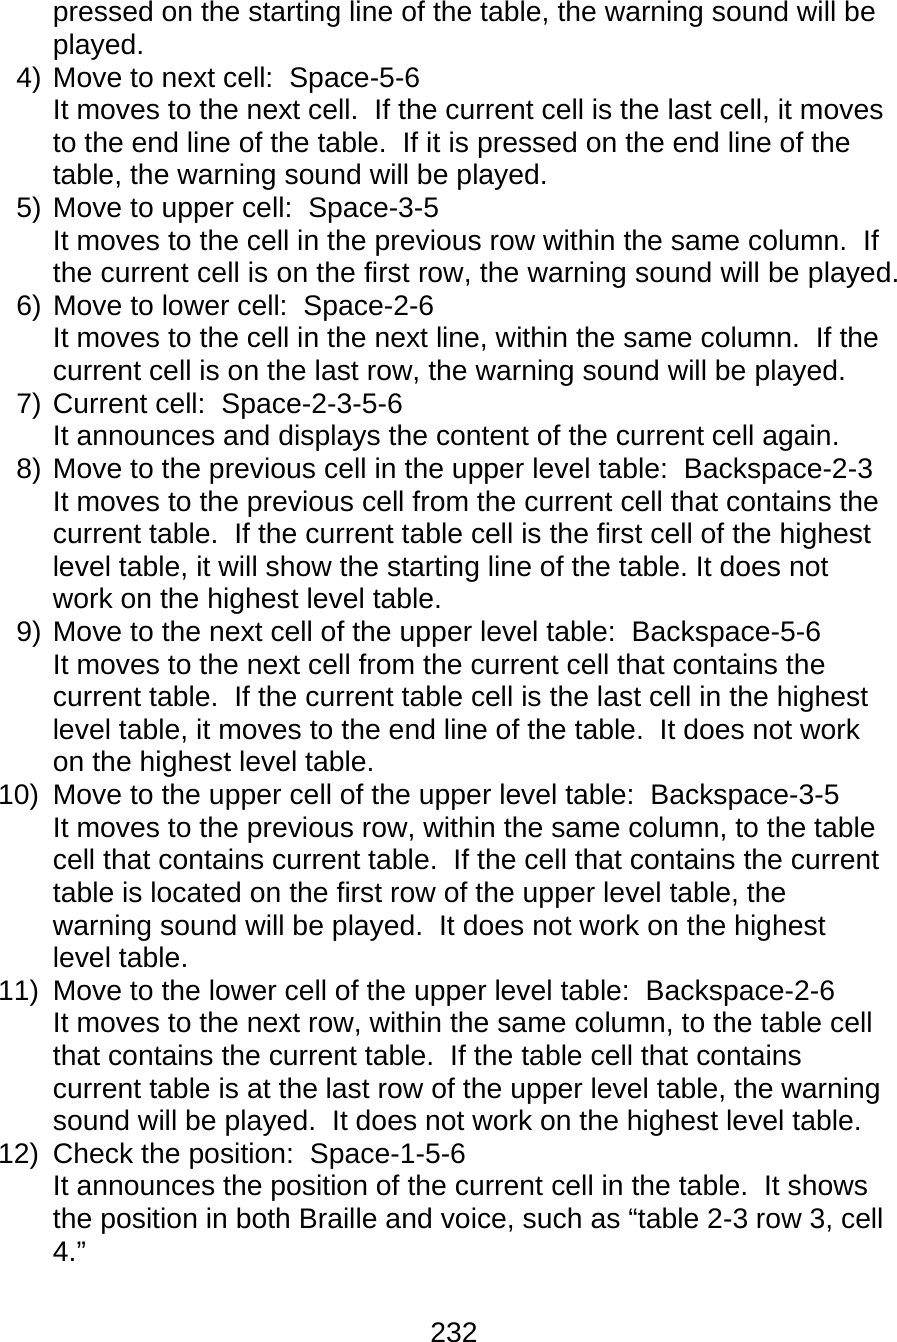 232  pressed on the starting line of the table, the warning sound will be played. 4) Move to next cell:  Space-5-6 It moves to the next cell.  If the current cell is the last cell, it moves to the end line of the table.  If it is pressed on the end line of the table, the warning sound will be played. 5) Move to upper cell:  Space-3-5 It moves to the cell in the previous row within the same column.  If the current cell is on the first row, the warning sound will be played. 6) Move to lower cell:  Space-2-6 It moves to the cell in the next line, within the same column.  If the current cell is on the last row, the warning sound will be played. 7) Current cell:  Space-2-3-5-6 It announces and displays the content of the current cell again. 8) Move to the previous cell in the upper level table:  Backspace-2-3 It moves to the previous cell from the current cell that contains the current table.  If the current table cell is the first cell of the highest level table, it will show the starting line of the table. It does not work on the highest level table. 9) Move to the next cell of the upper level table:  Backspace-5-6 It moves to the next cell from the current cell that contains the current table.  If the current table cell is the last cell in the highest level table, it moves to the end line of the table.  It does not work on the highest level table. 10)  Move to the upper cell of the upper level table:  Backspace-3-5 It moves to the previous row, within the same column, to the table cell that contains current table.  If the cell that contains the current table is located on the first row of the upper level table, the warning sound will be played.  It does not work on the highest level table. 11)  Move to the lower cell of the upper level table:  Backspace-2-6 It moves to the next row, within the same column, to the table cell that contains the current table.  If the table cell that contains current table is at the last row of the upper level table, the warning sound will be played.  It does not work on the highest level table. 12) Check the position:  Space-1-5-6 It announces the position of the current cell in the table.  It shows the position in both Braille and voice, such as “table 2-3 row 3, cell 4.”  